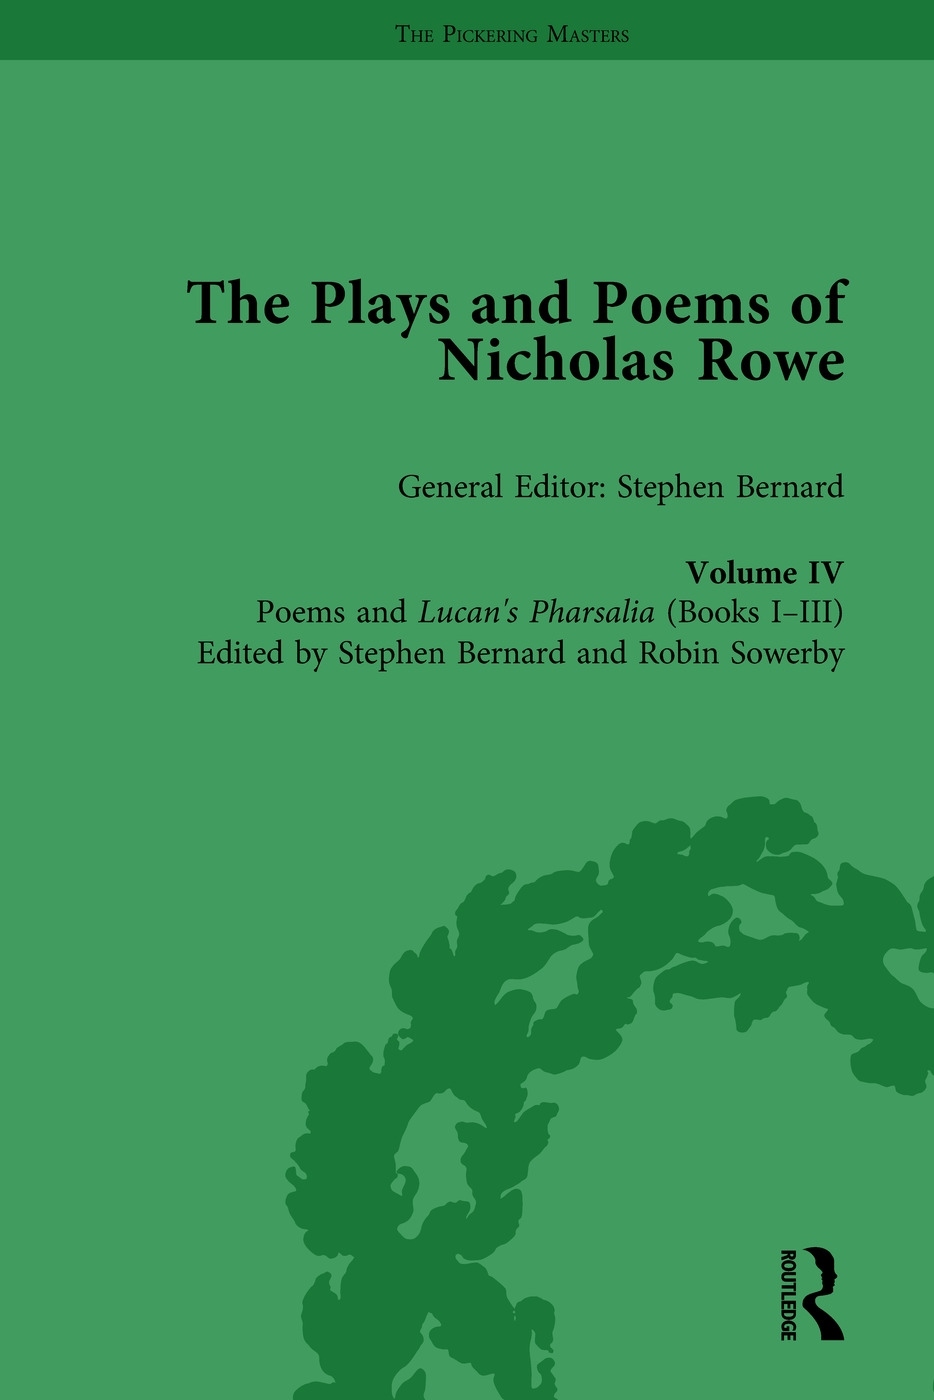 The Plays and Poems of Nicholas Rowe, Volume IV: Poems and Lucan’s Pharsalia (Books I-III)